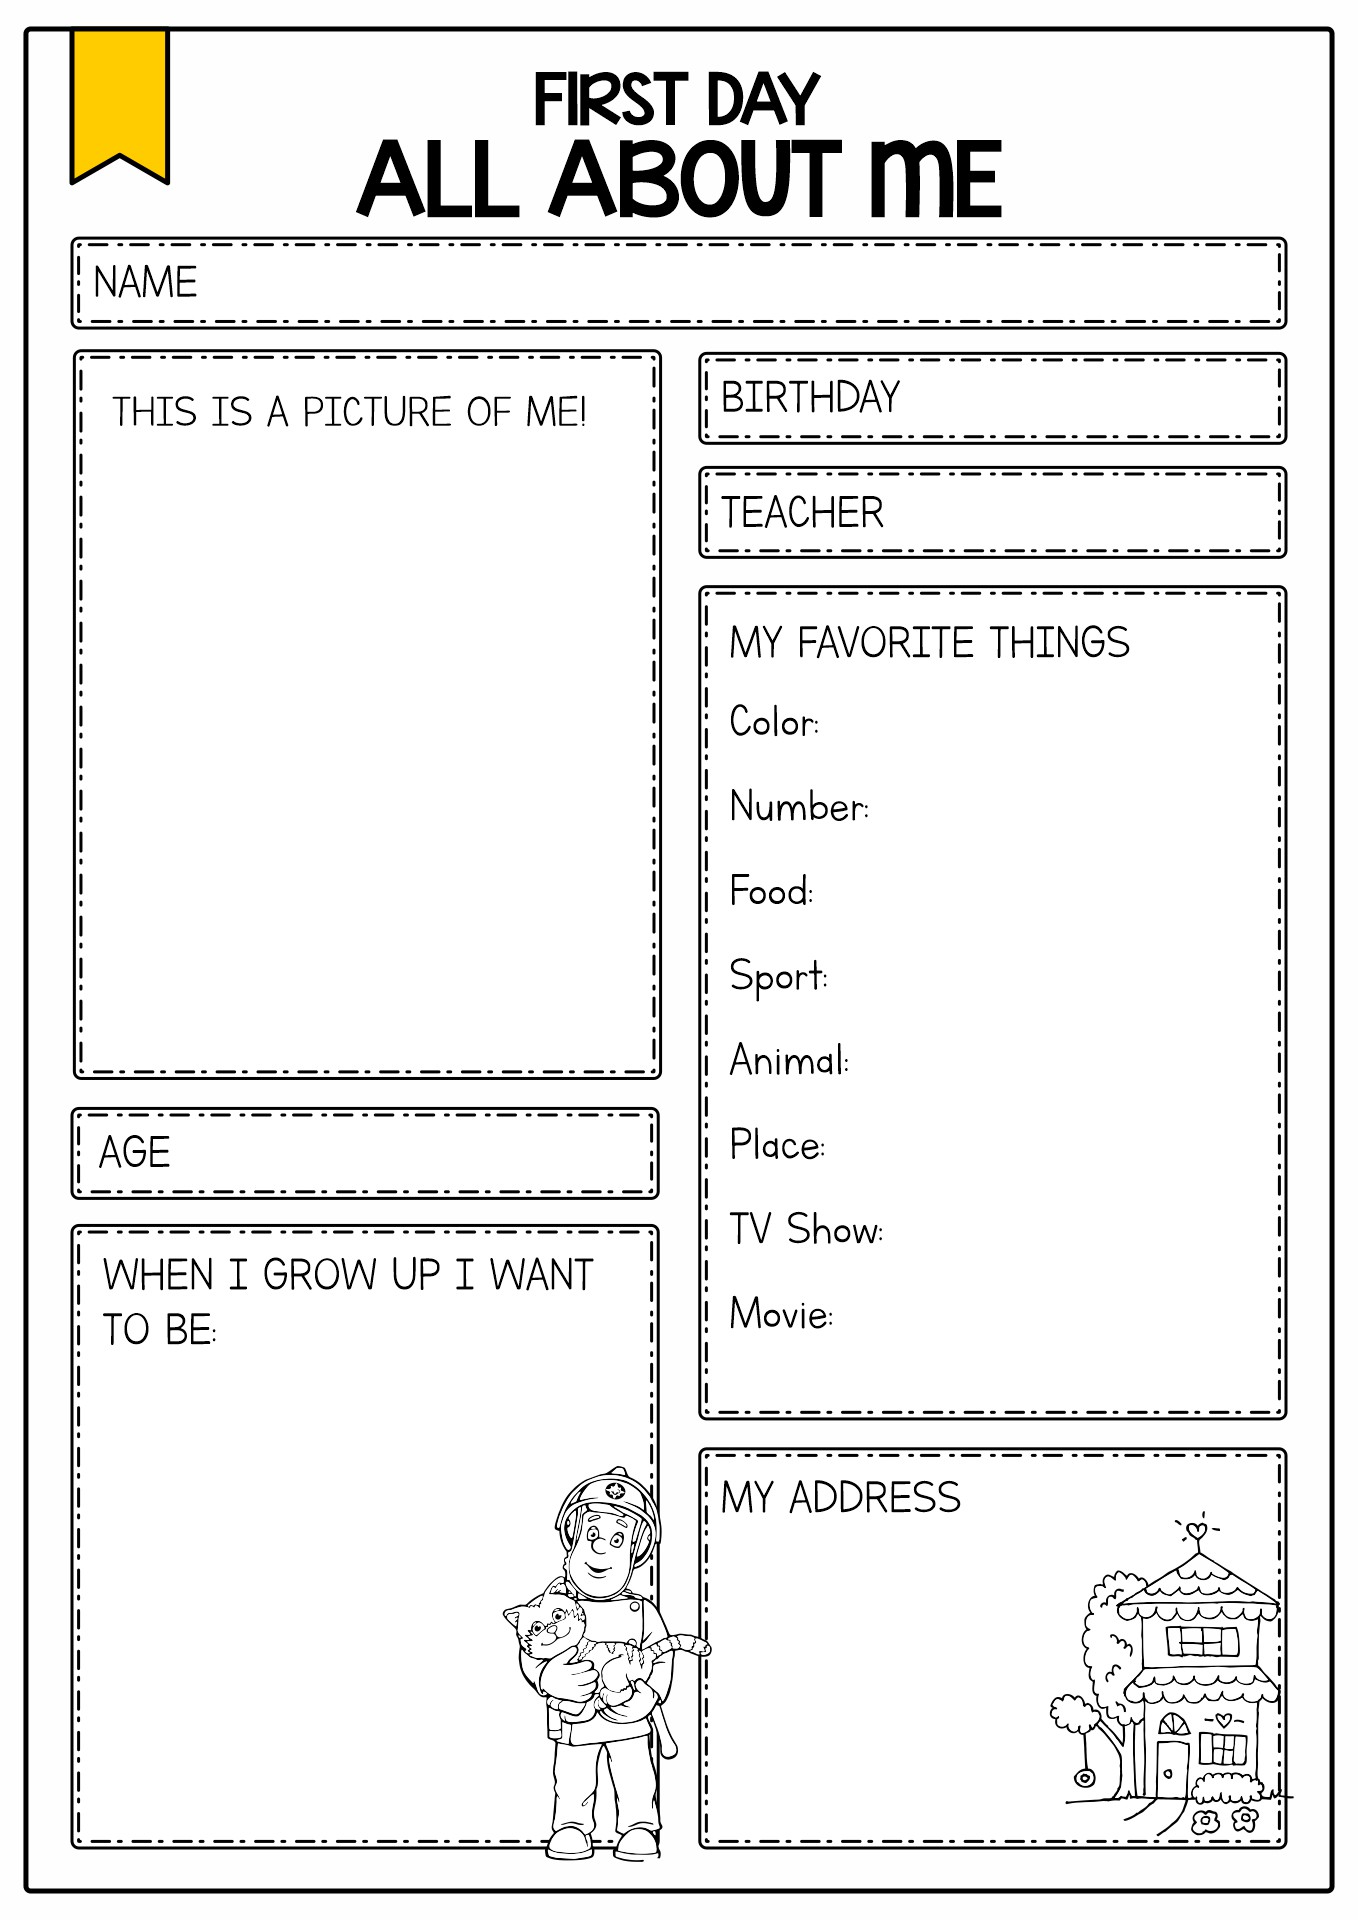 First Day All About Me Worksheet